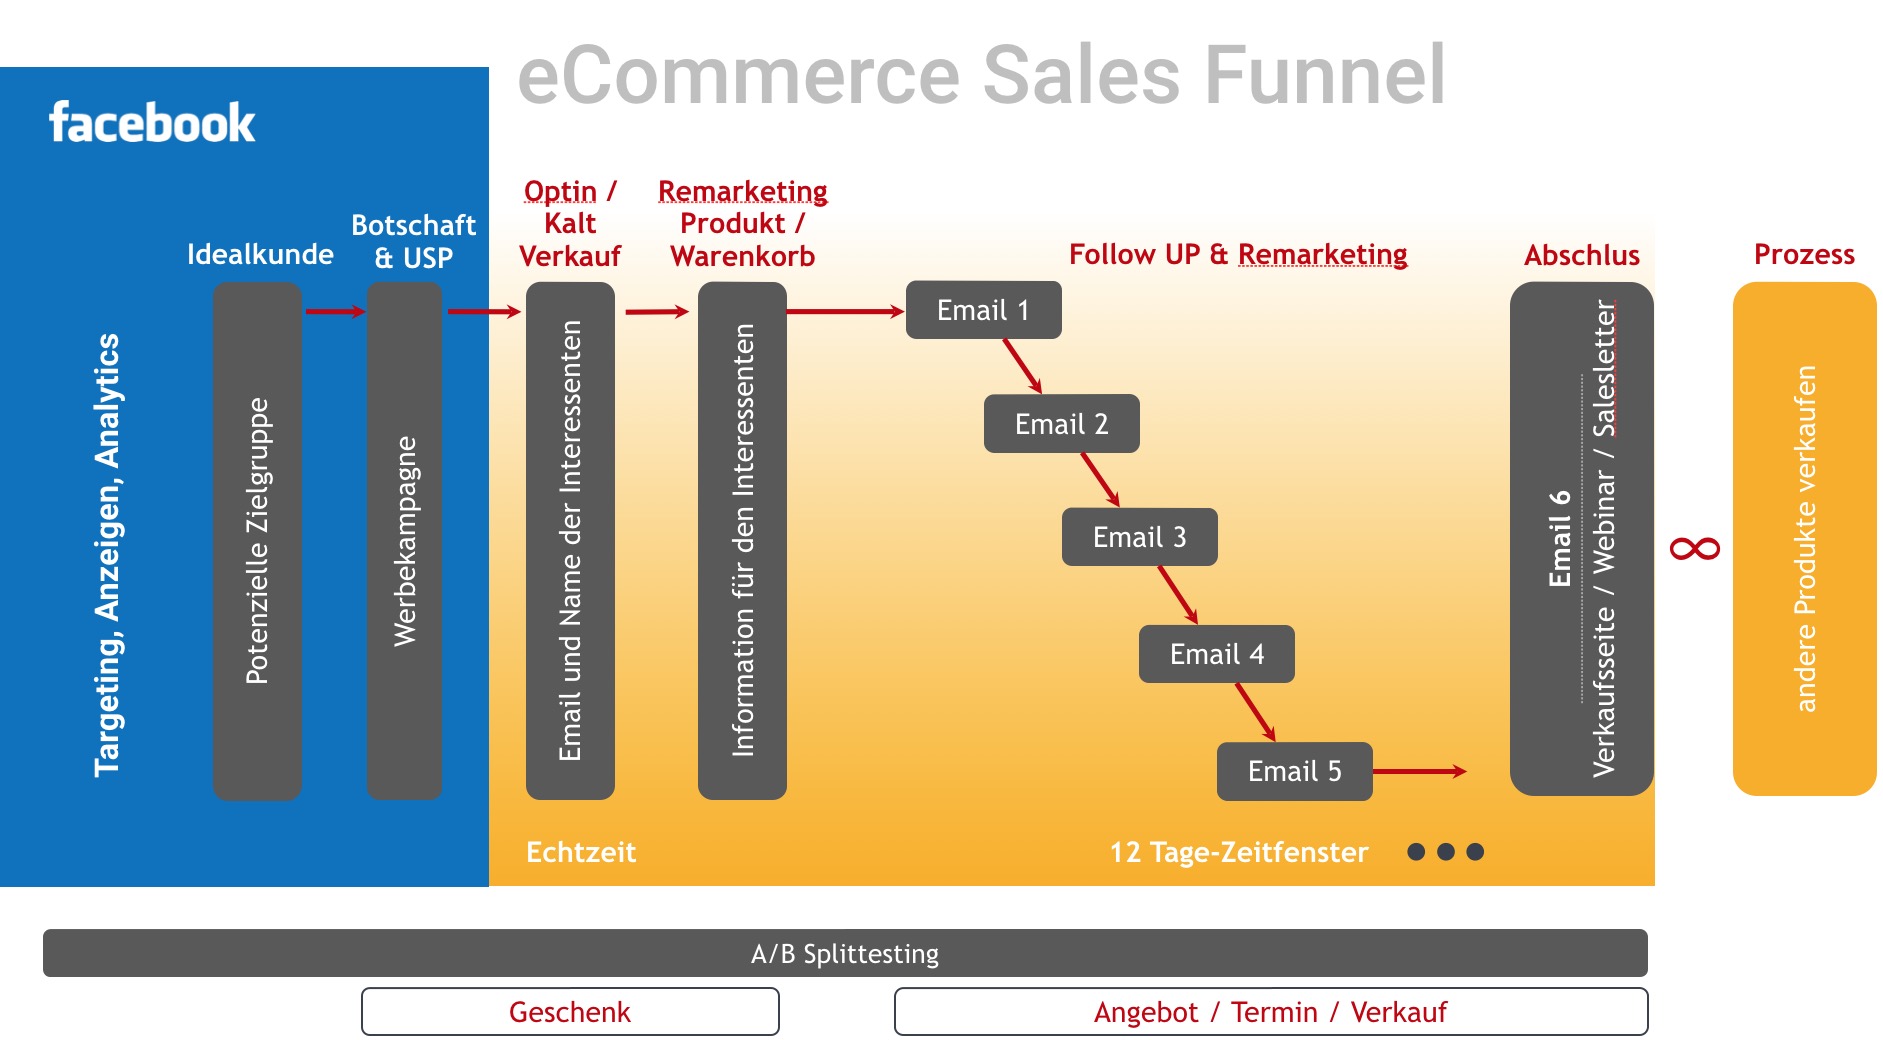 eCommerce Sales Funnel